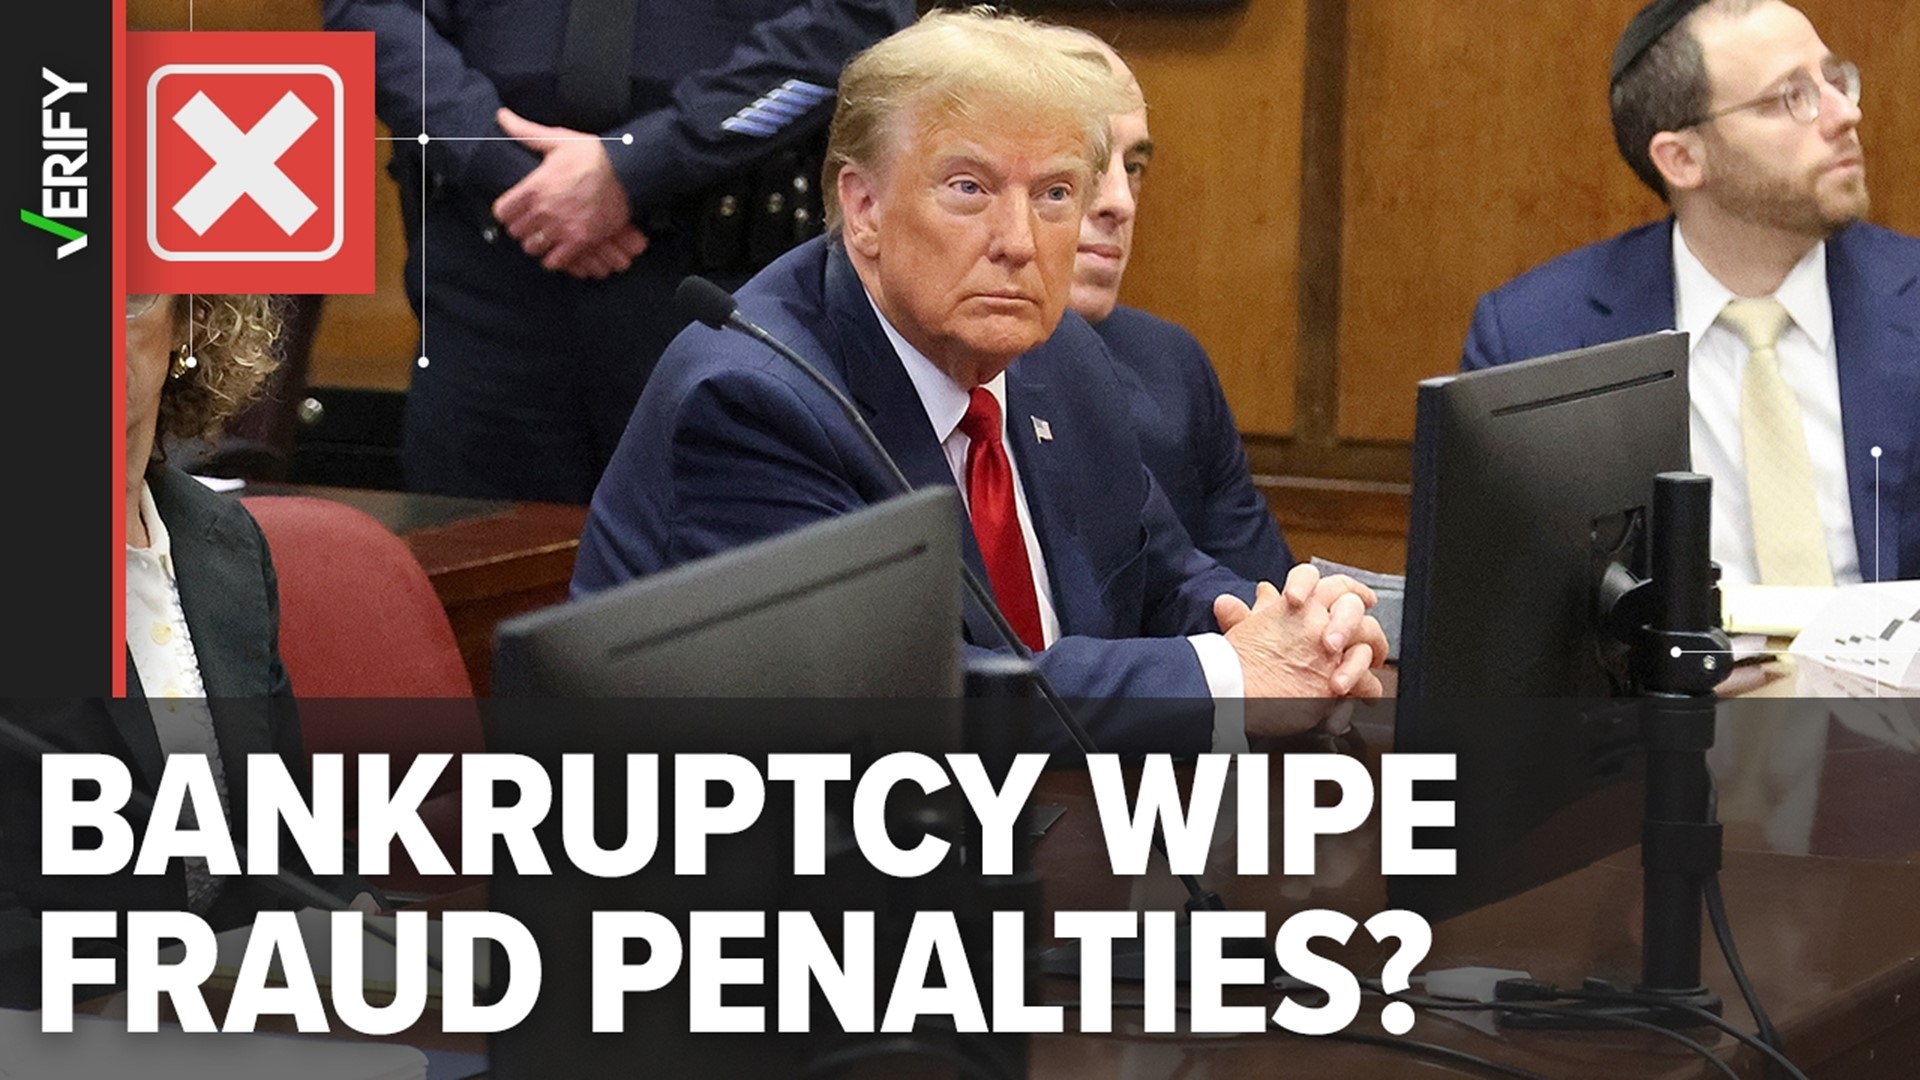 Bankruptcy would not get Donald Trump out of paying his civil fraud penalties. He would still be liable to pay even if he or his organization declared bankruptcy.